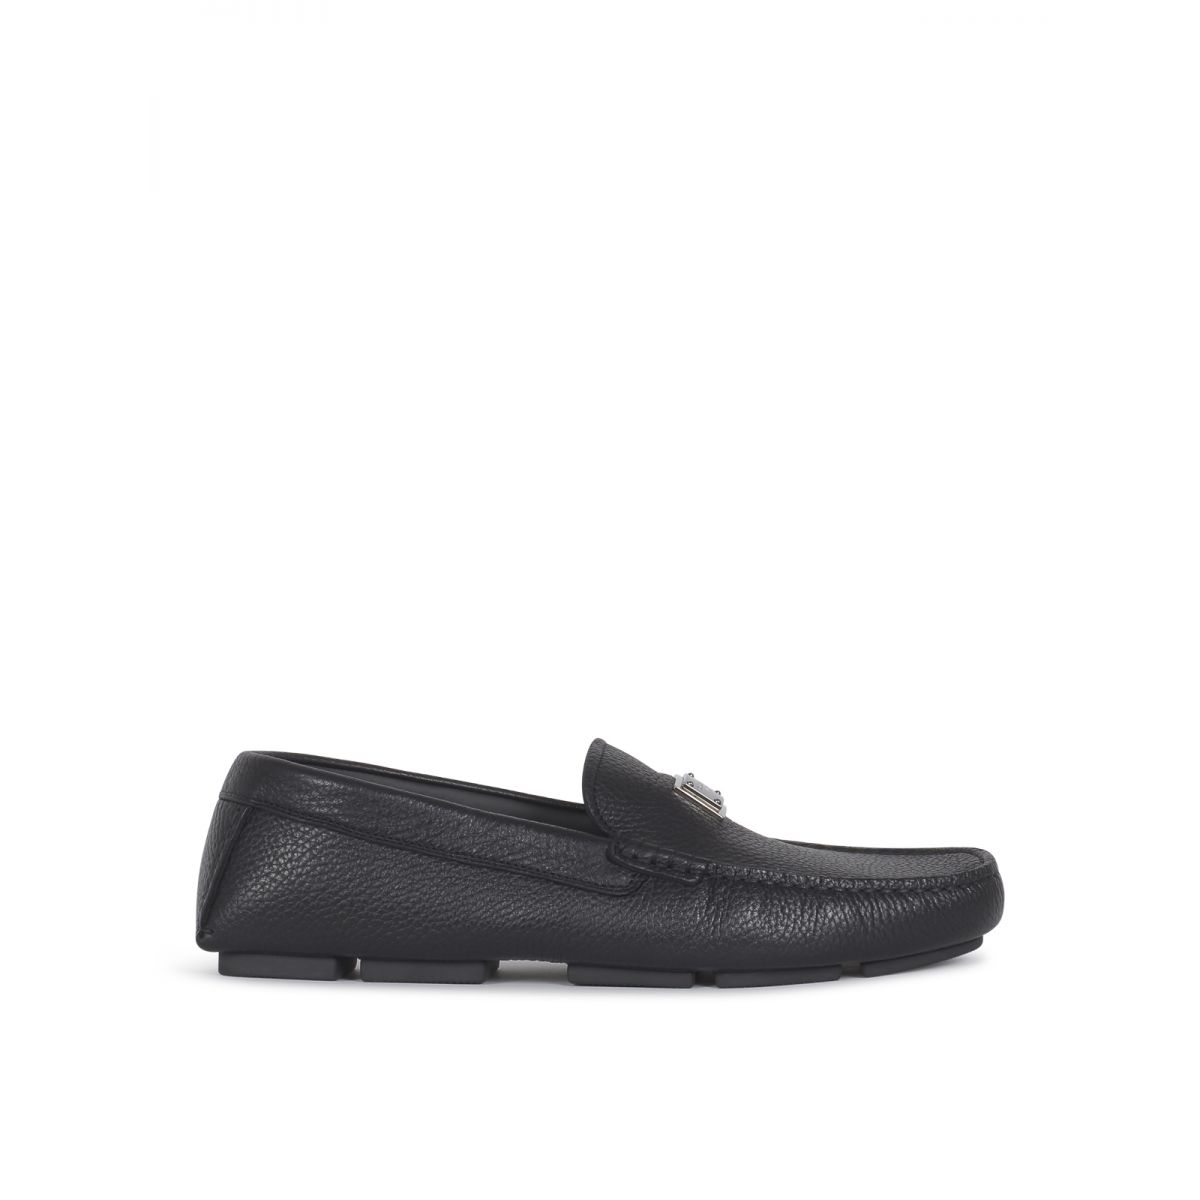 DOLCE & GABBANA - Moccasins from the DG Driver line